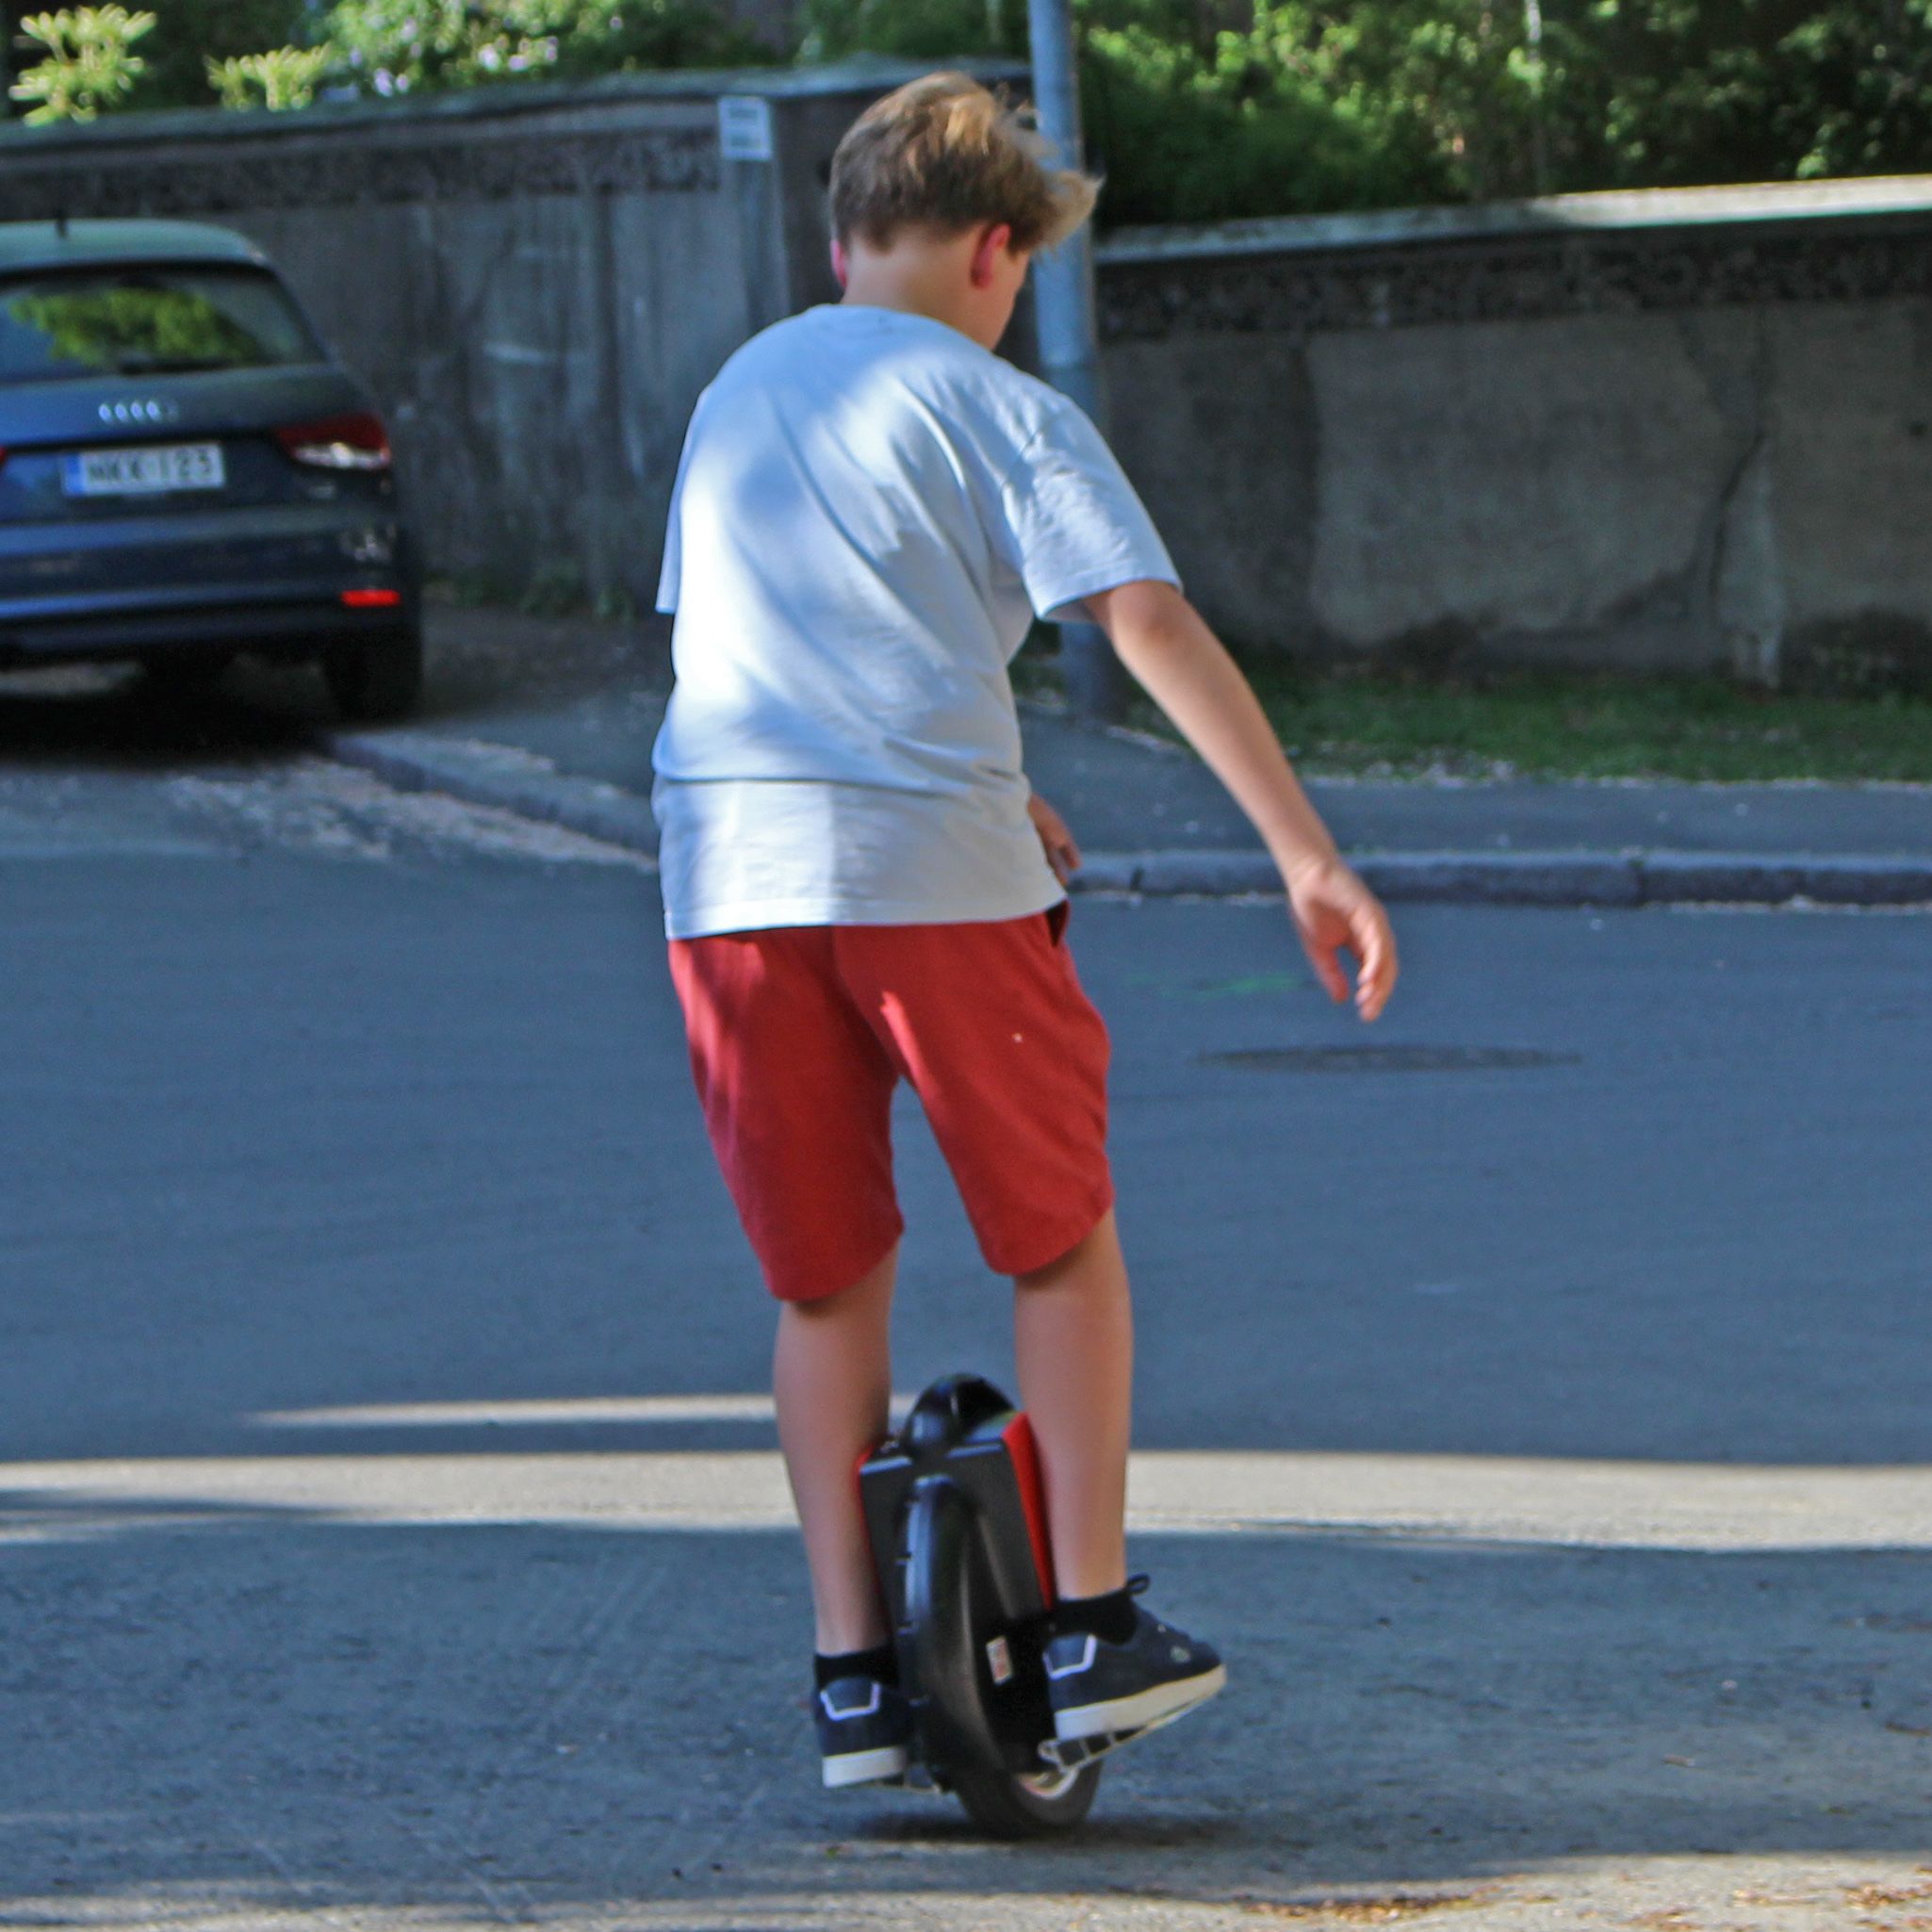 Rating of the best electric unicycle of 2020 according to consumer reviews